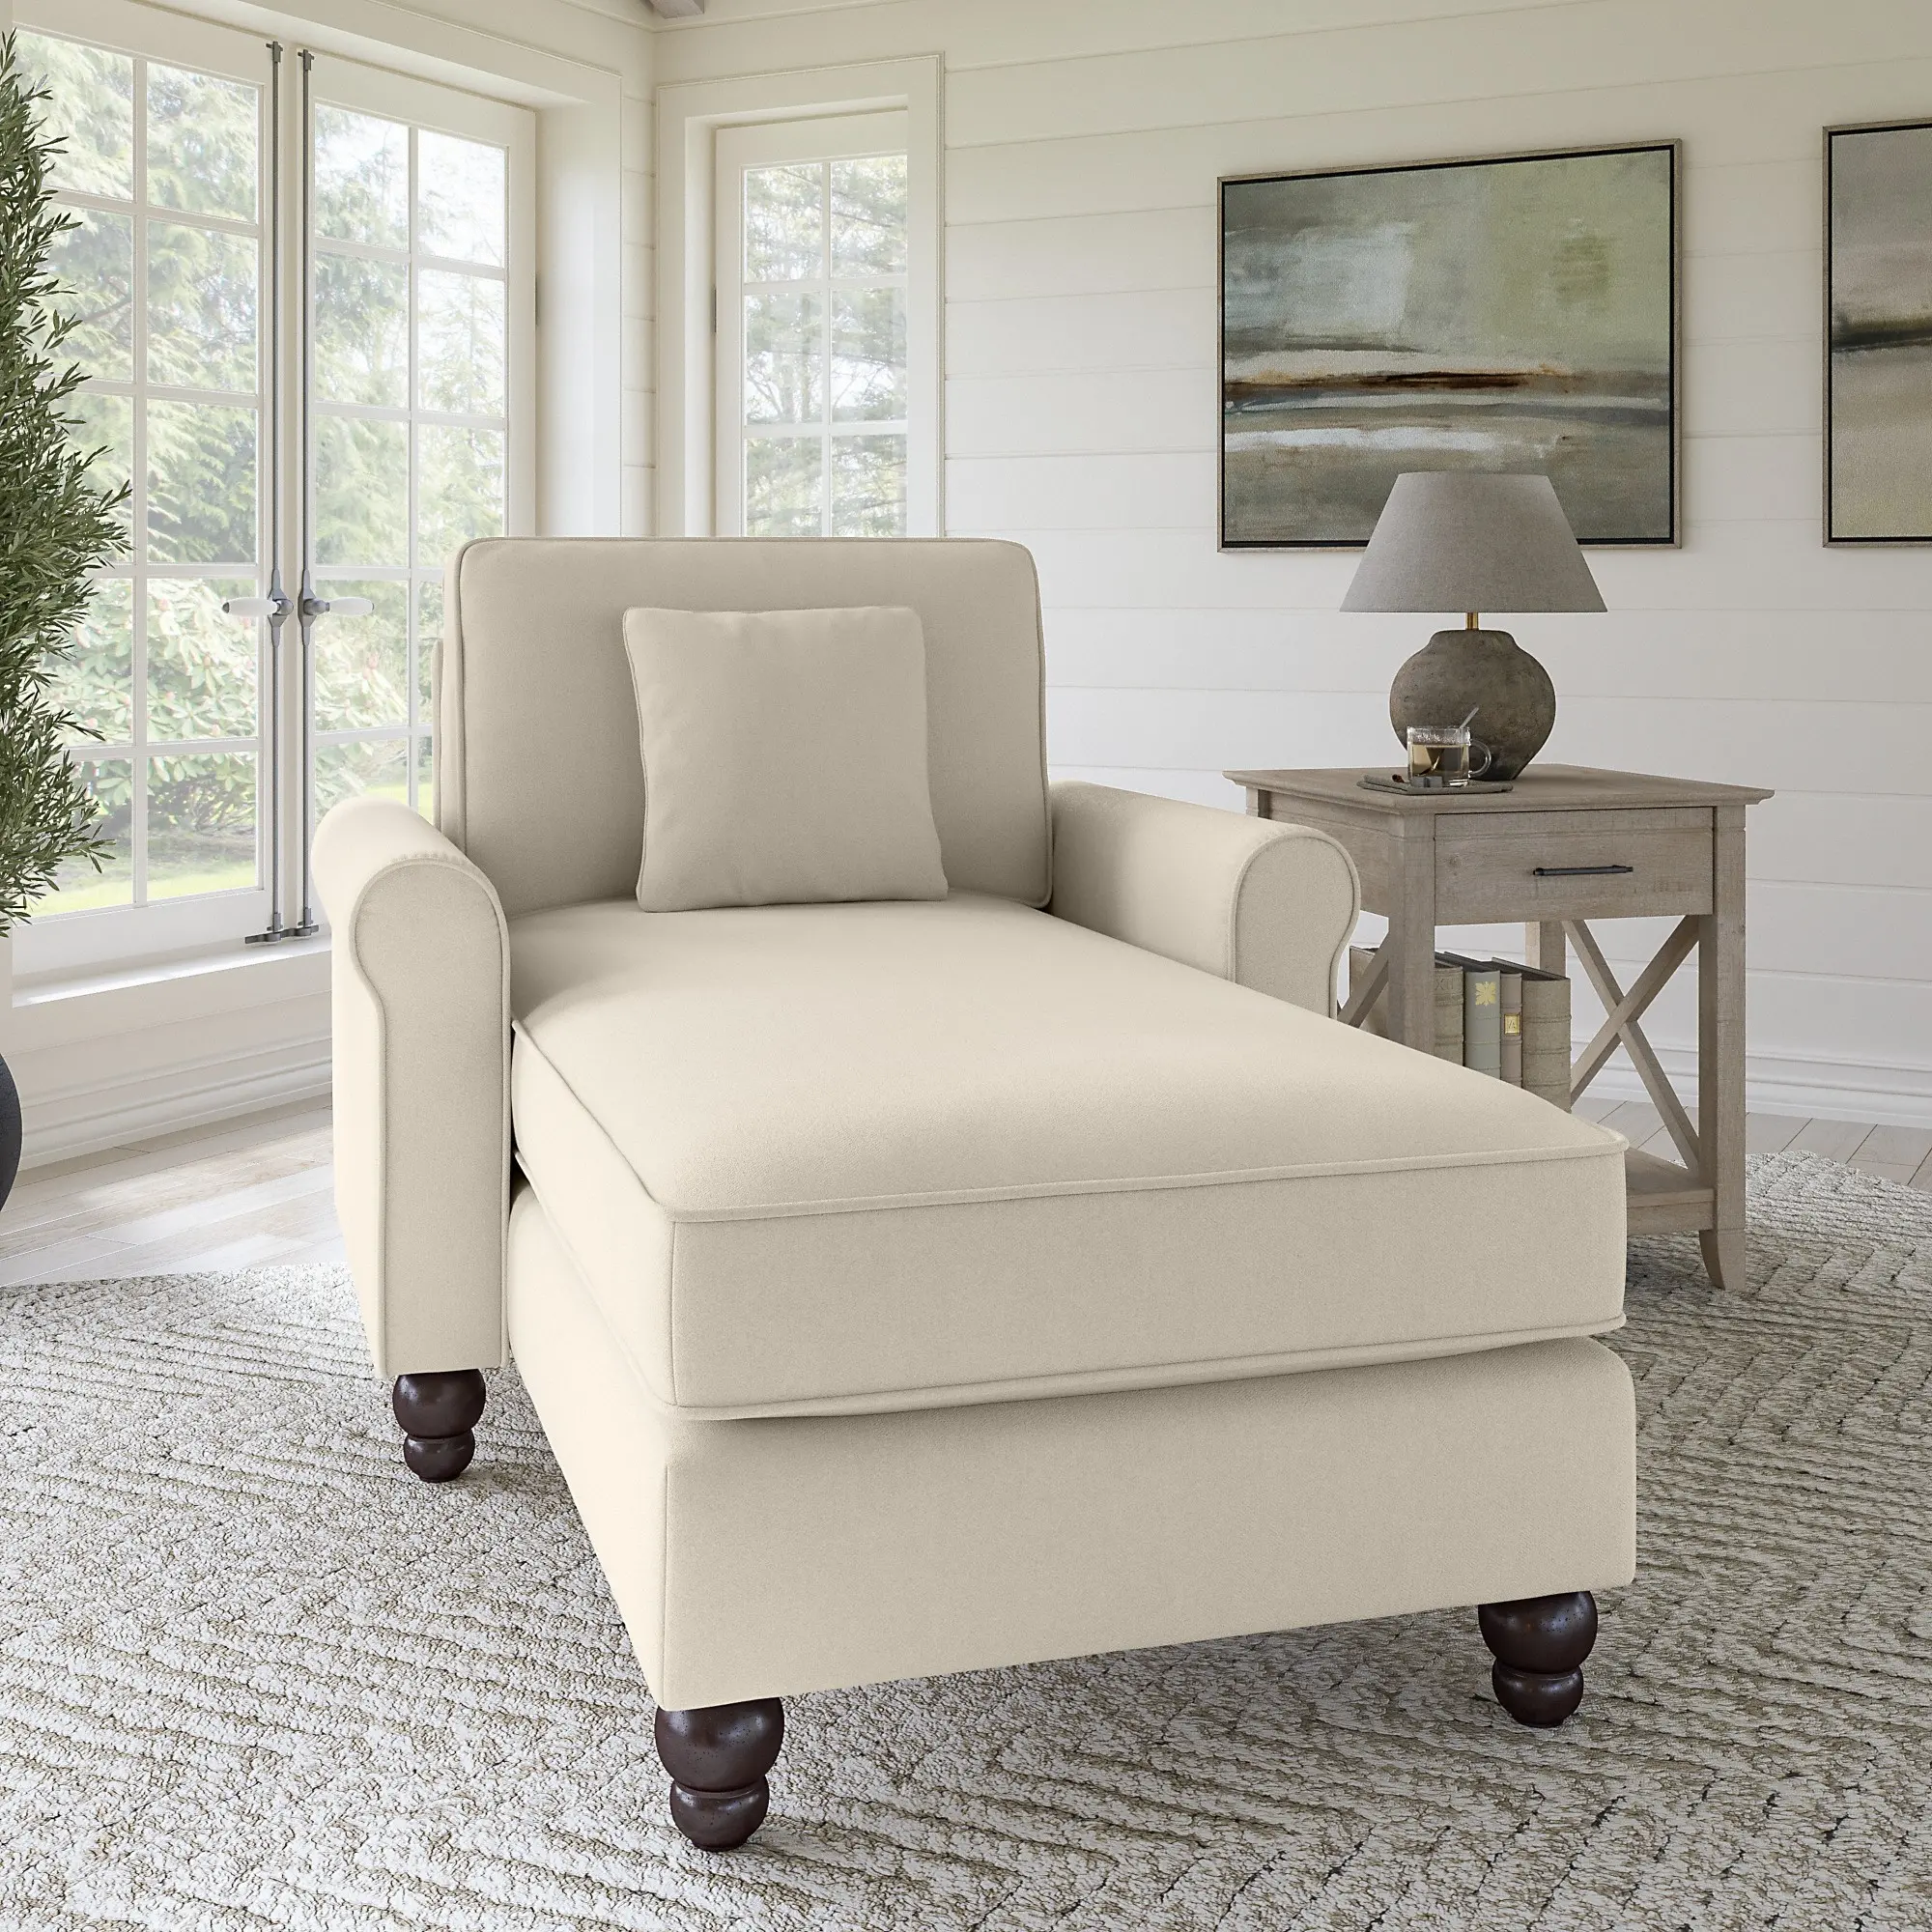 Hudson Cream Chaise Lounge with Arms - Bush Furniture